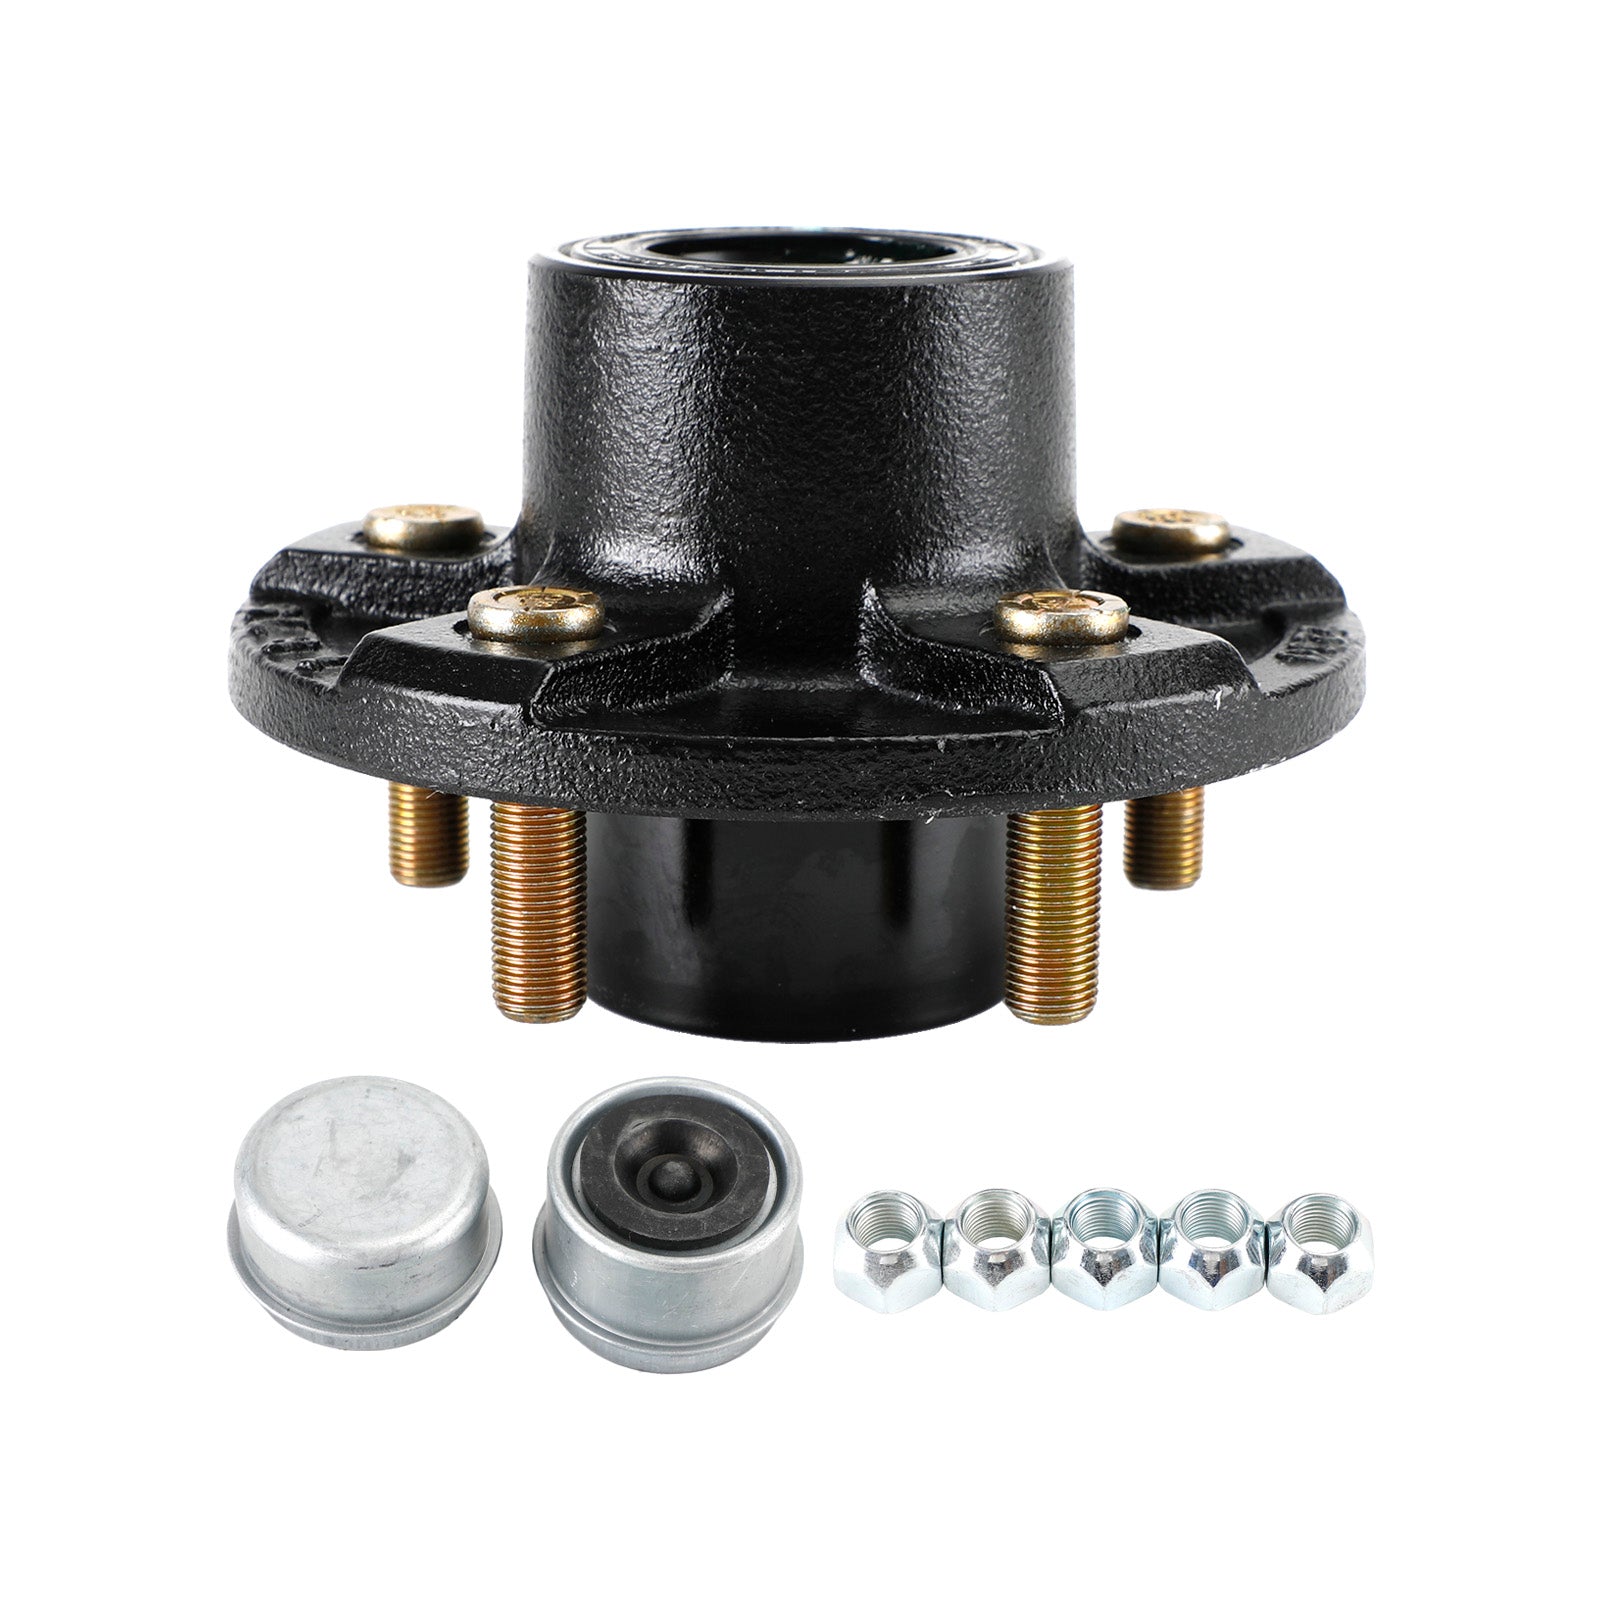 Grease Trailer Idler Hub Assembly for 3.5K Axles - 5 on 4-1/2 - Pre-Greased,Fits 3.5K E-Z Lube and etrailer Easy Grease axles